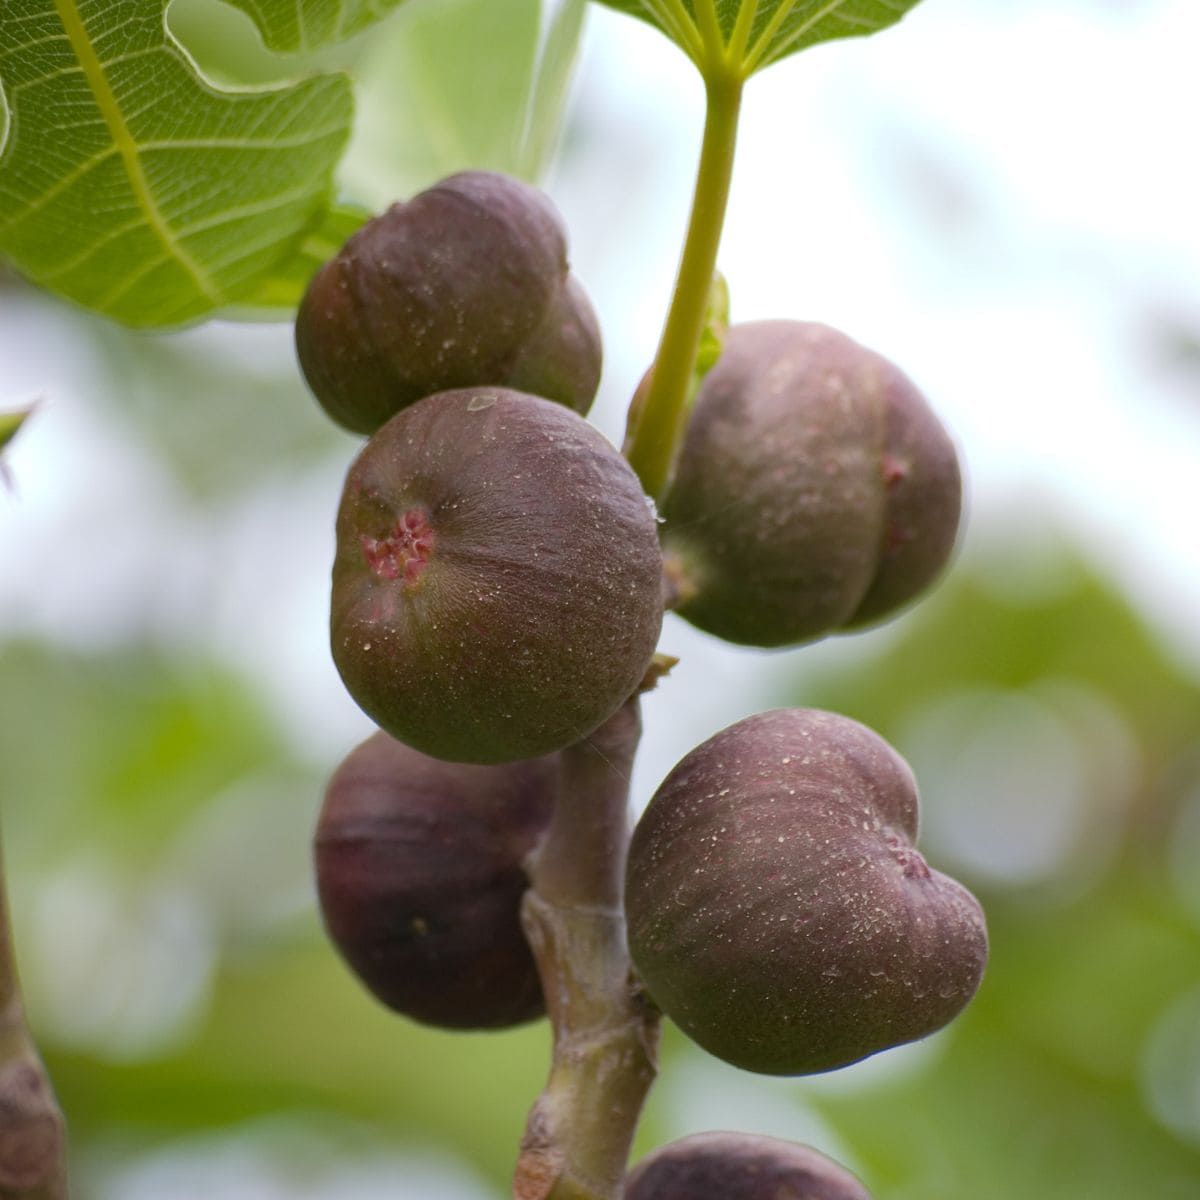 figs on a tree branch.